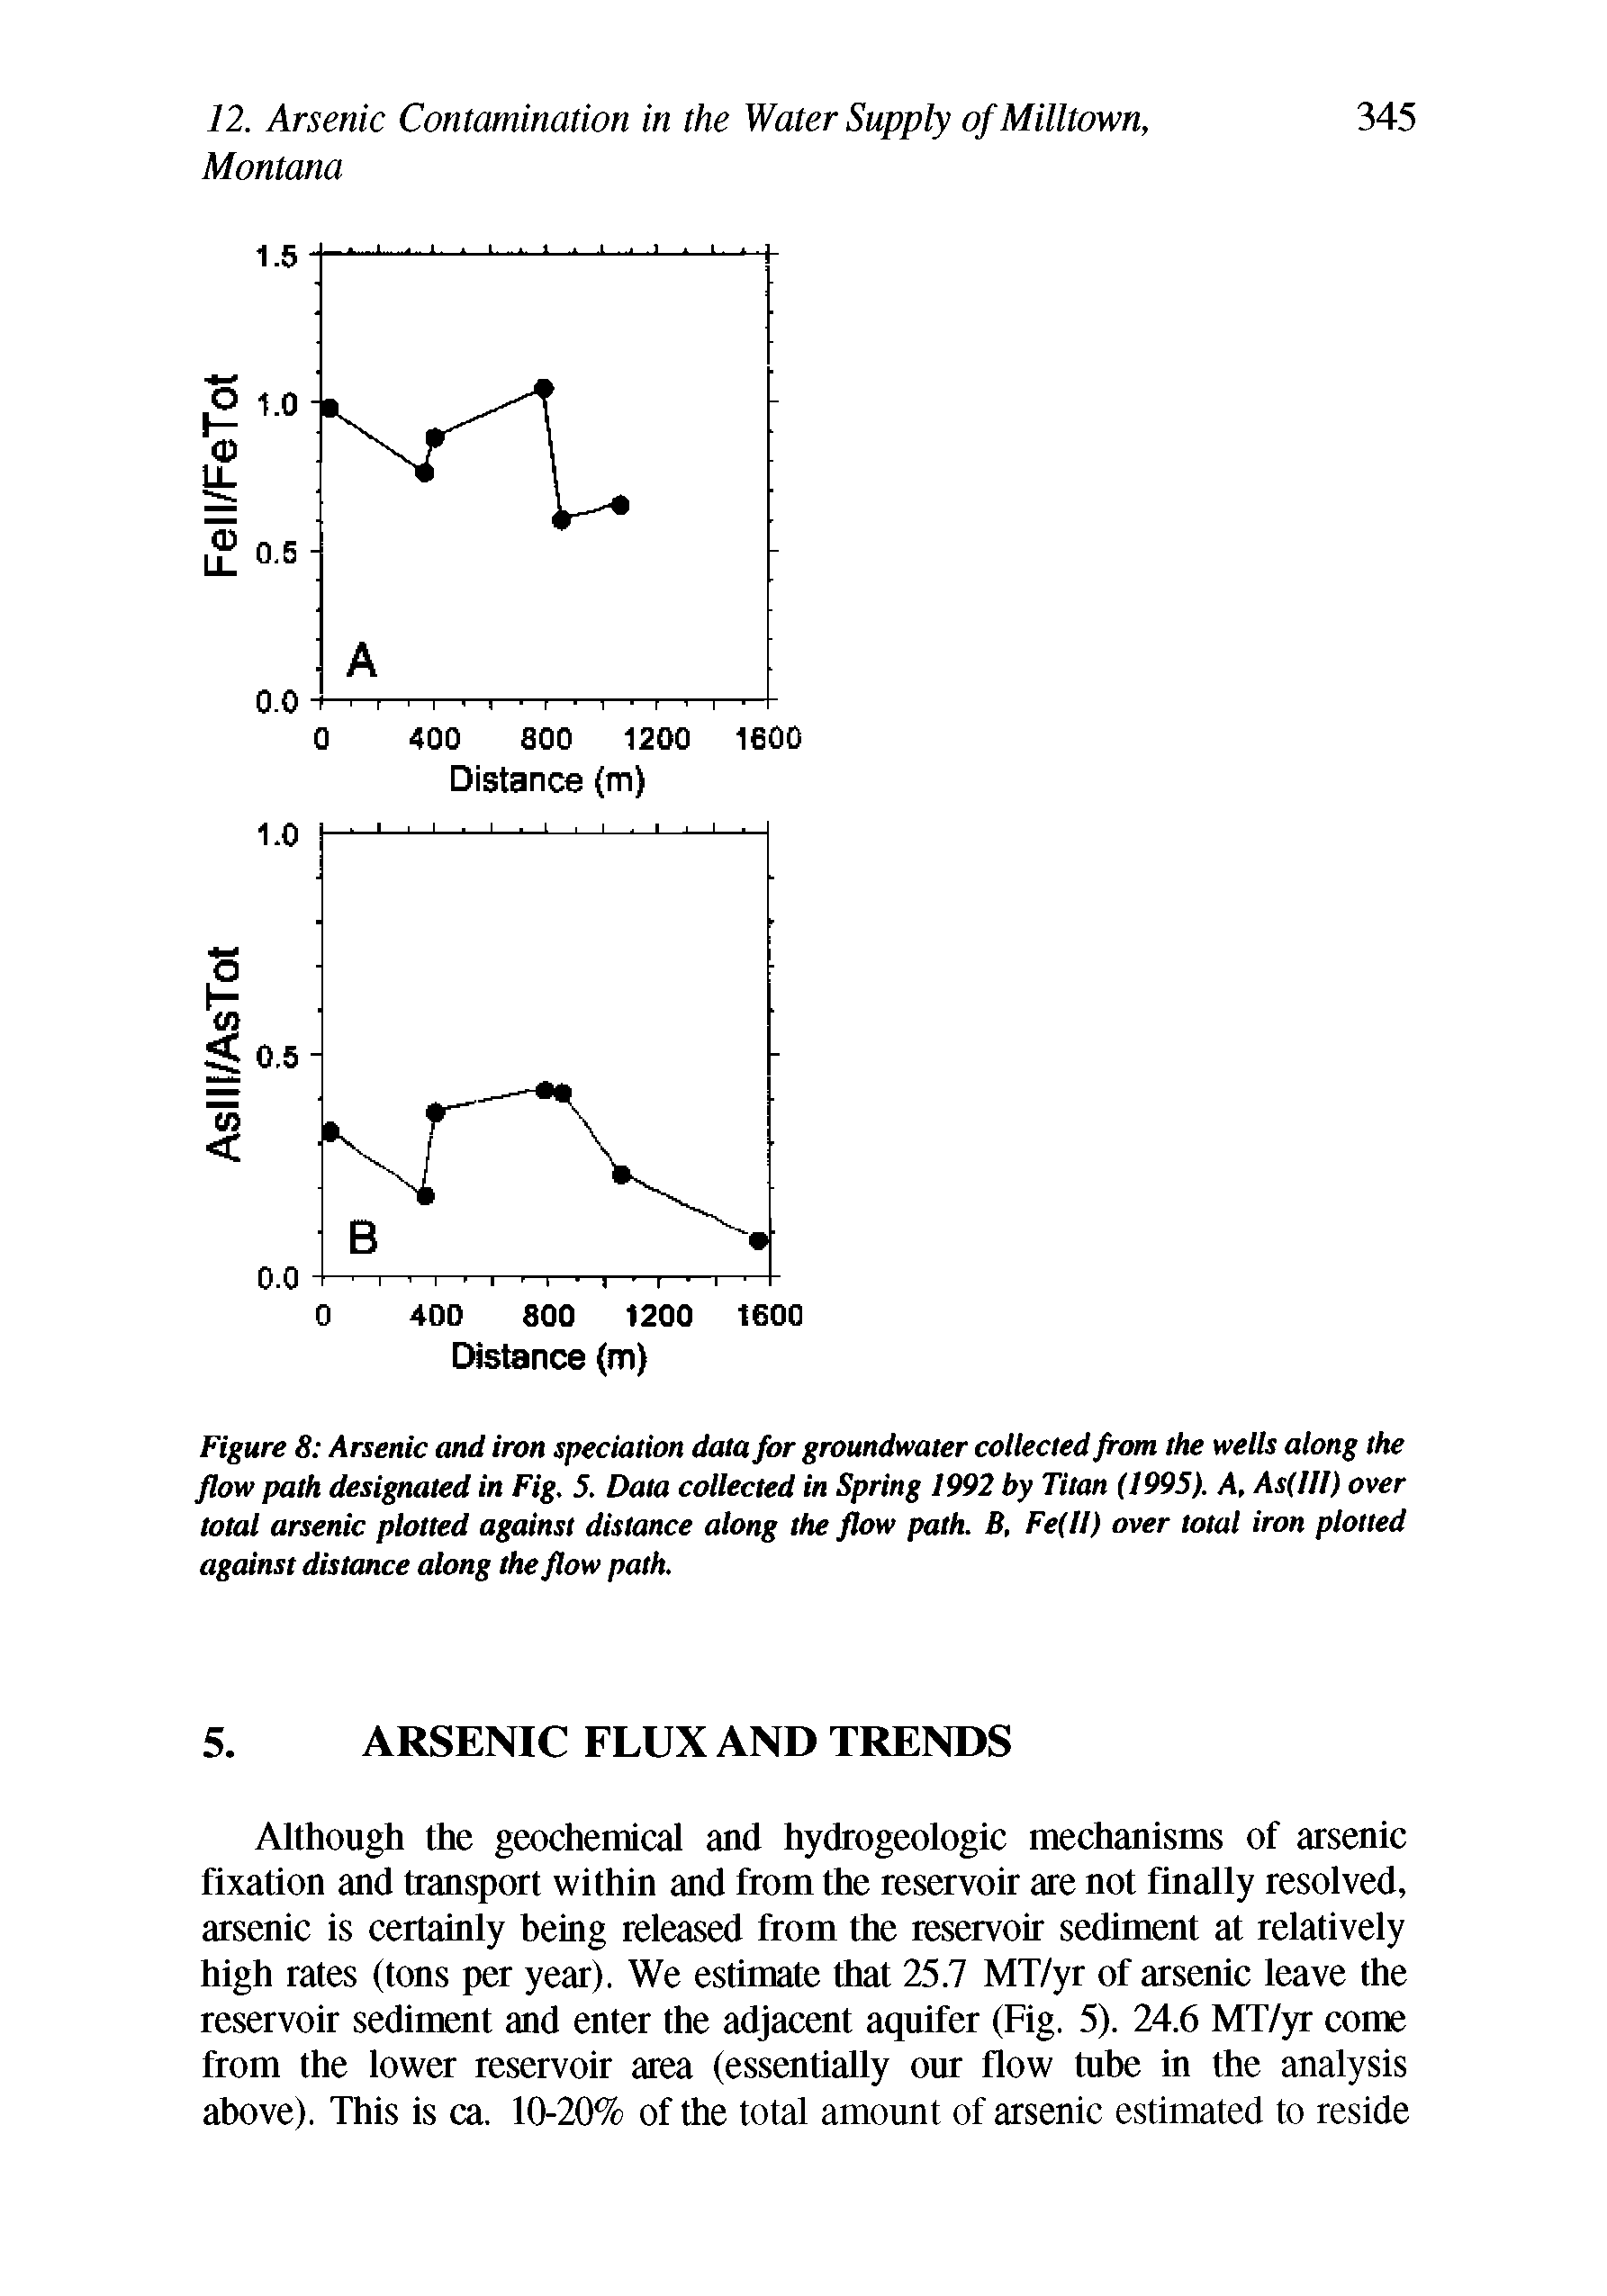 Figure 8 Arsenic and iron speciation data for groundwater collected from the wells along the flow path designated in Fig. 5. Data collected in Spring 1992 by Titan (1995). A, As(Ill) over total arsenic plotted against distance along the flow path. B, Fe(ll) over total iron plotted against distance along the flow path.